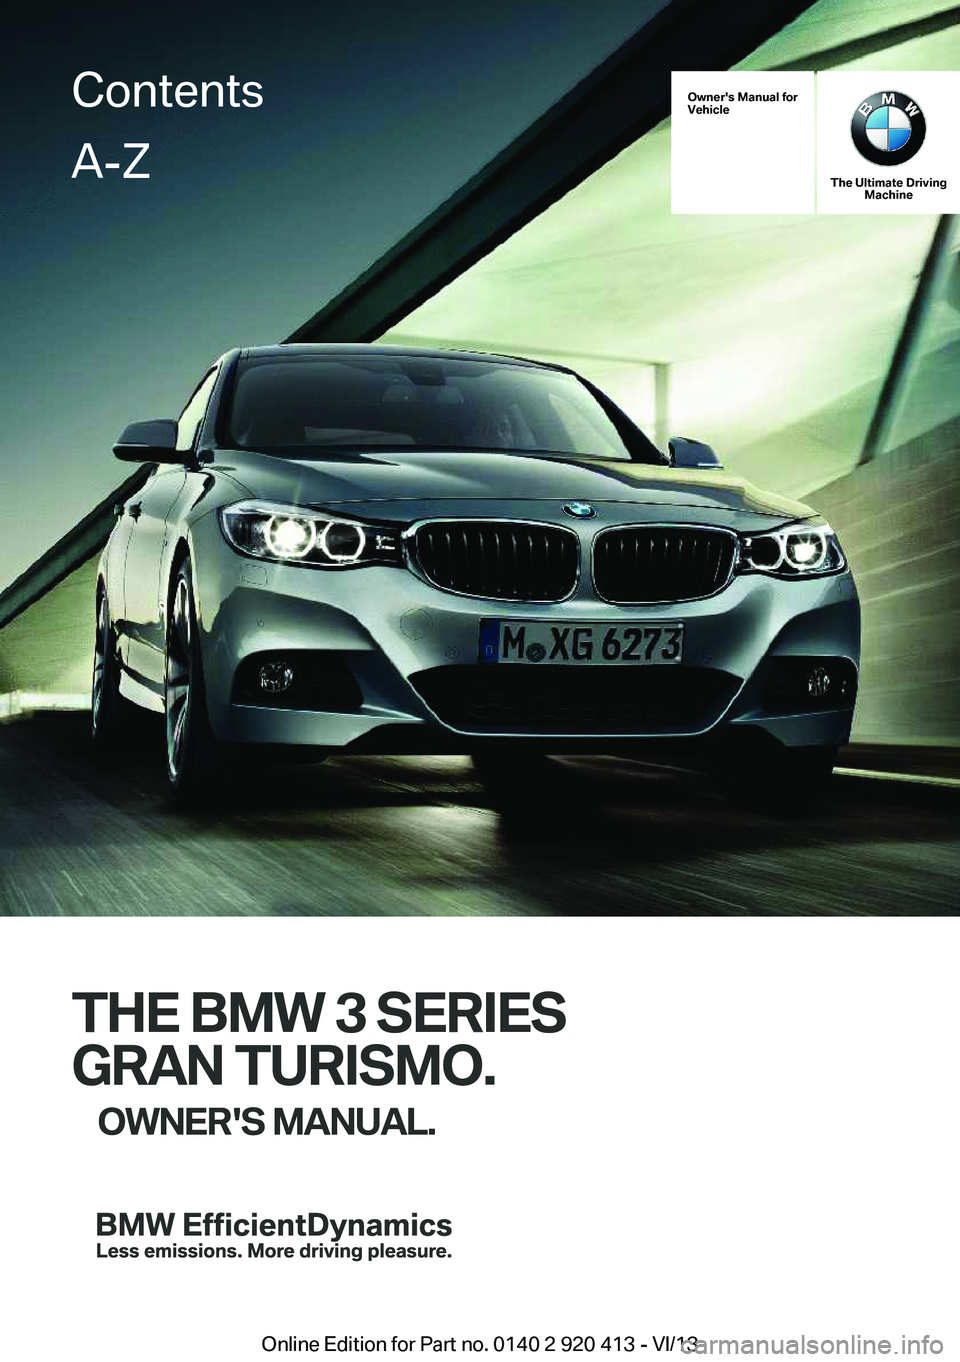 BMW 328I XDRIVE GRAN TURISMO 2014  Owners Manual Owner's Manual for
Vehicle
The Ultimate Driving Machine
THE BMW 3 SERIES
GRAN TURISMO. OWNER'S MANUAL.
ContentsA-Z
Online Edition for Part no. 0140 2 920 413 - VI/13   